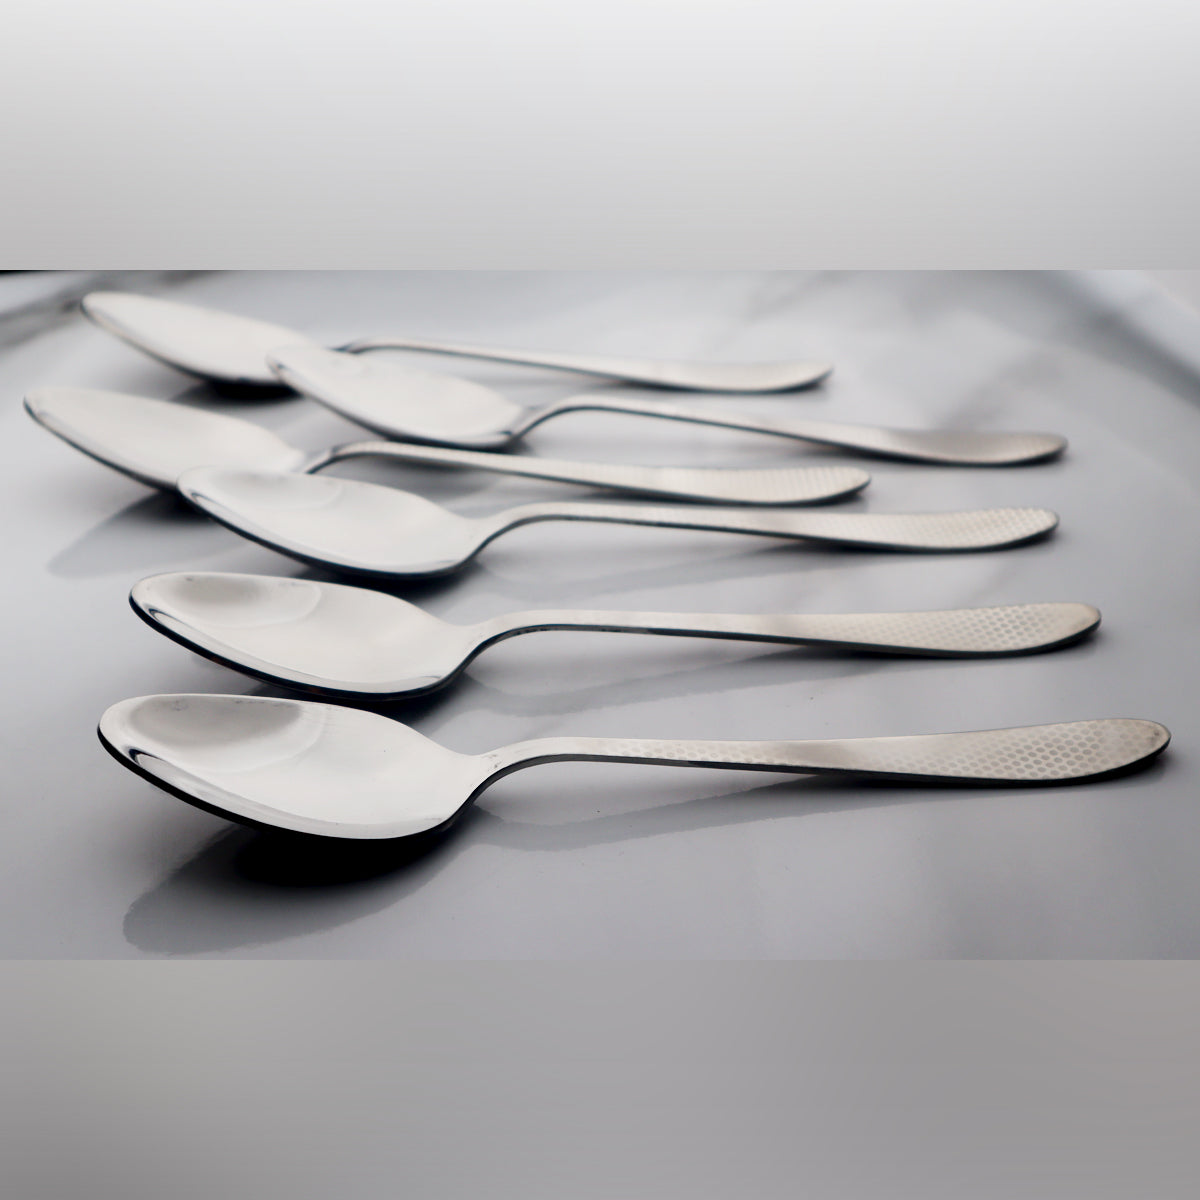 Chef best quality stainless steel kitchen tools Table spoons-majestic chef